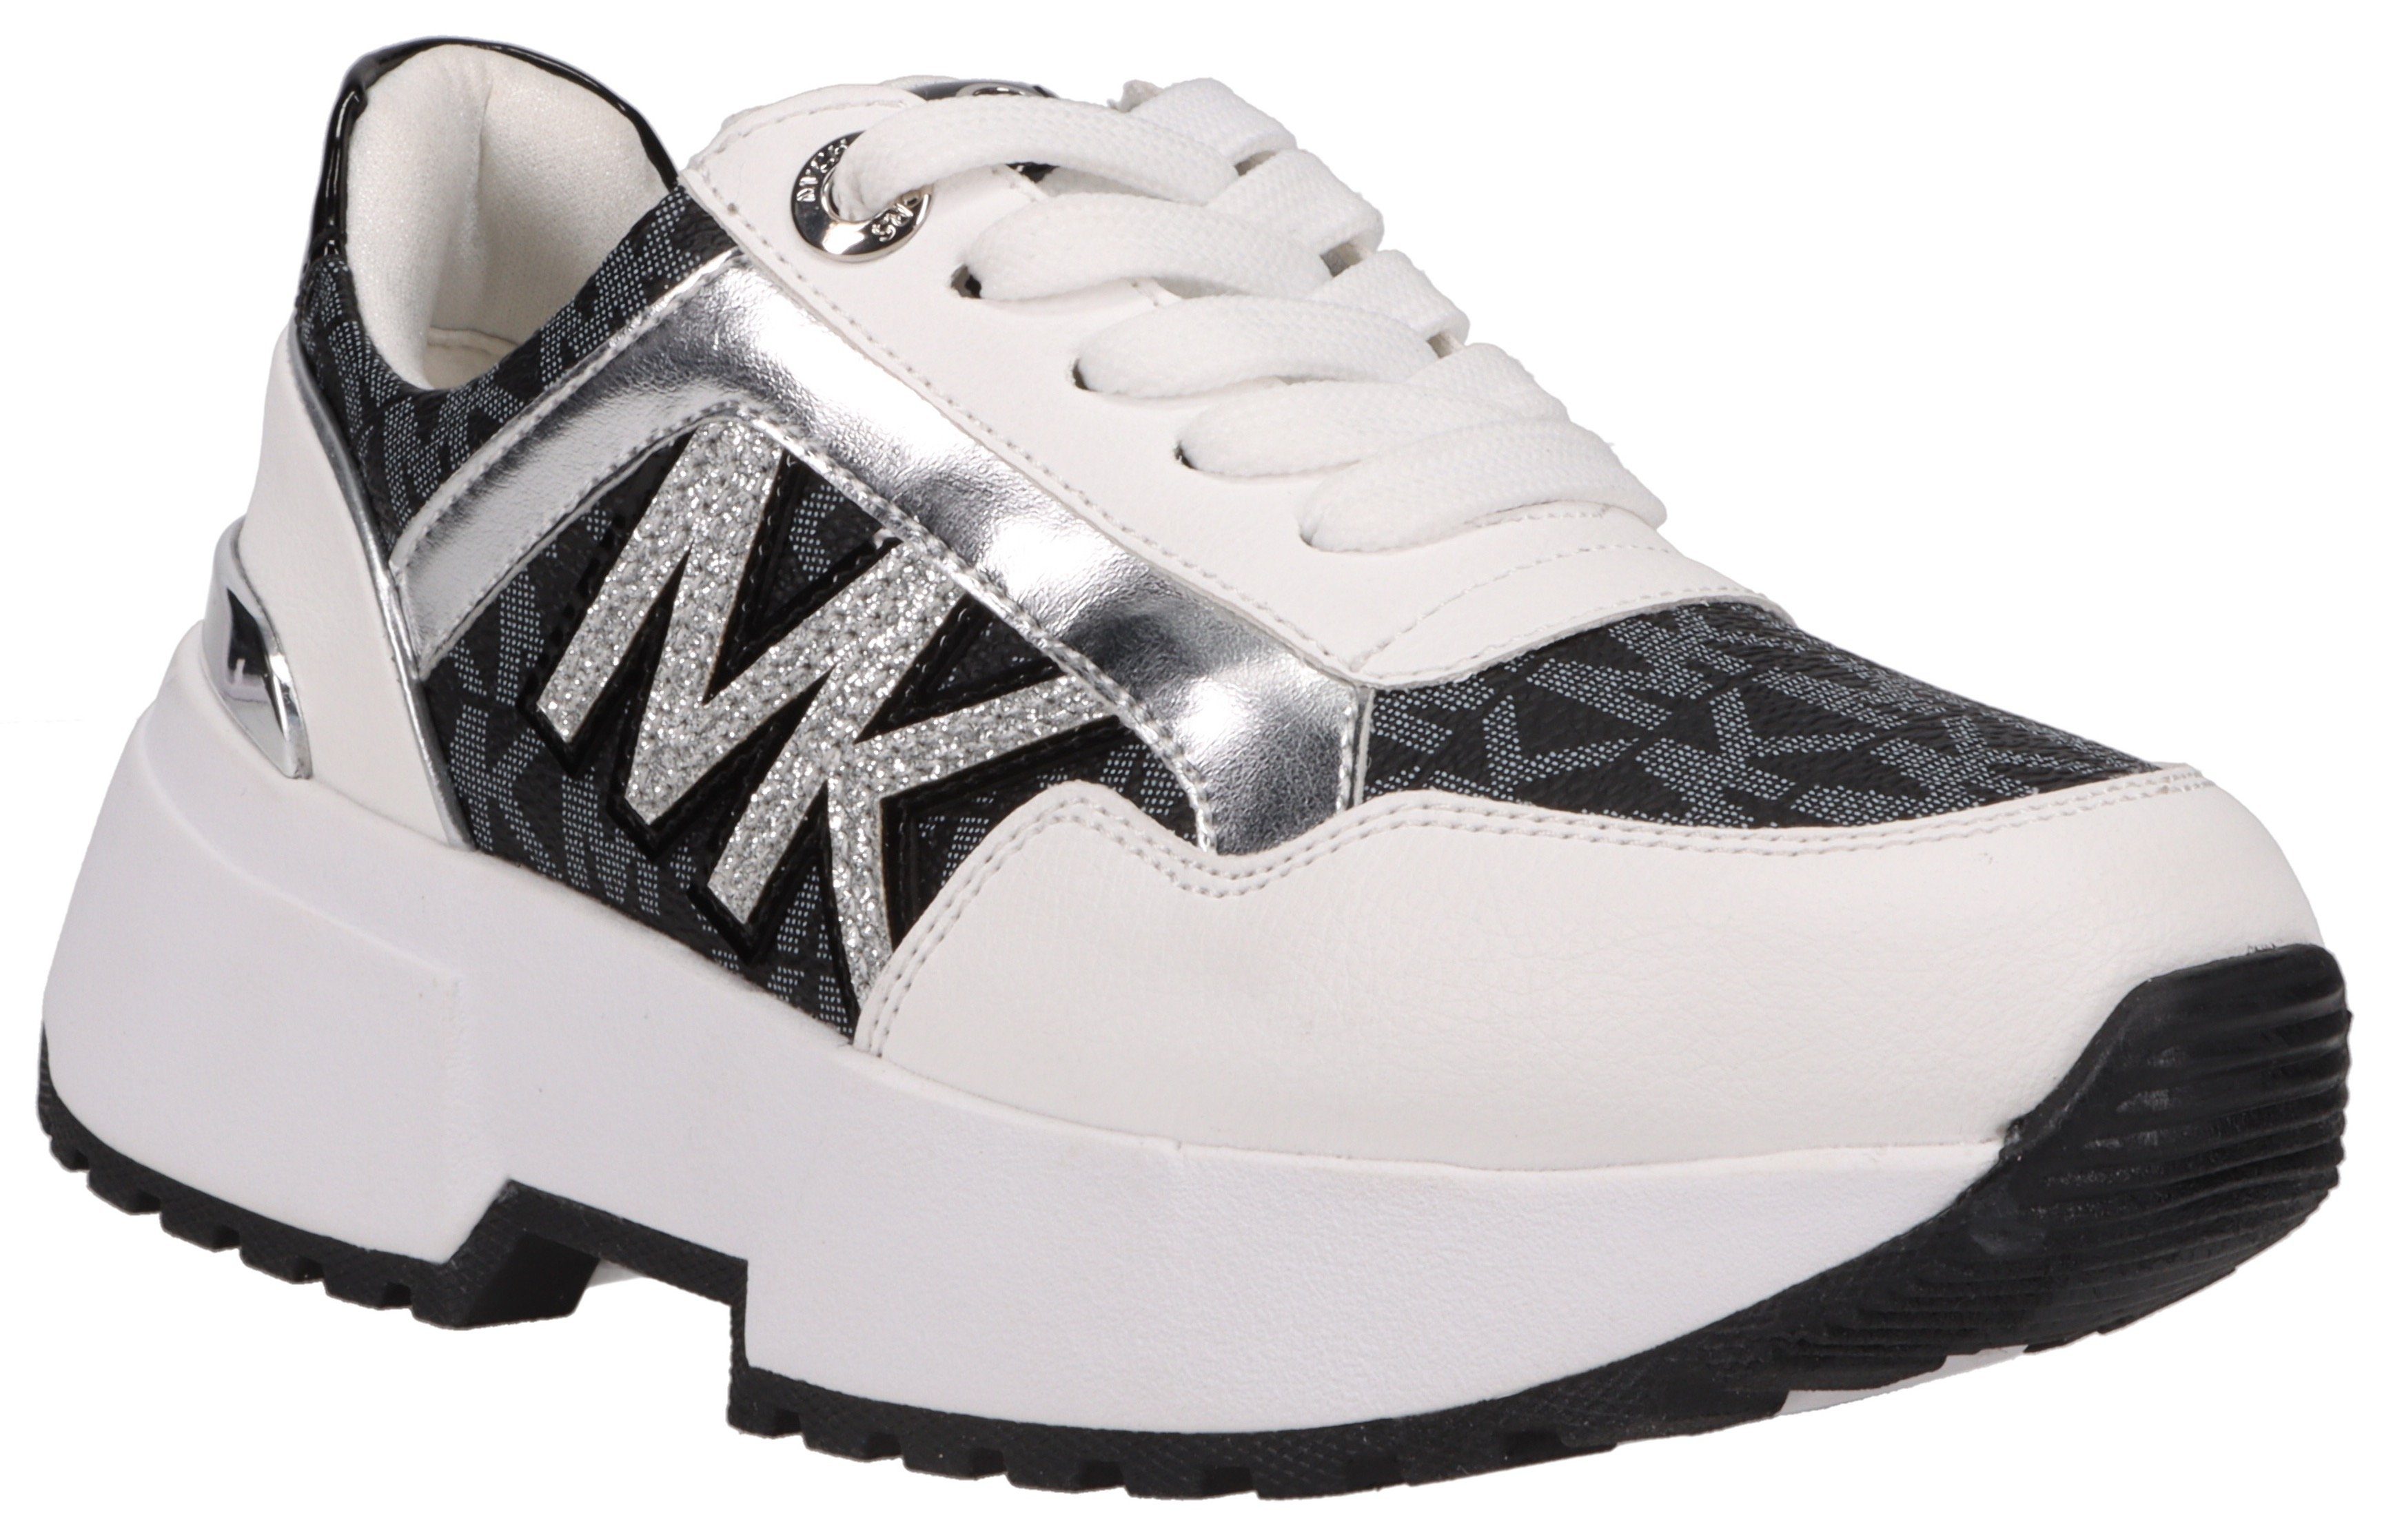 MICHAEL KORS KIDS Sneaker Cosmo Maddy Plateausneaker mit Chunky-Laufsohle